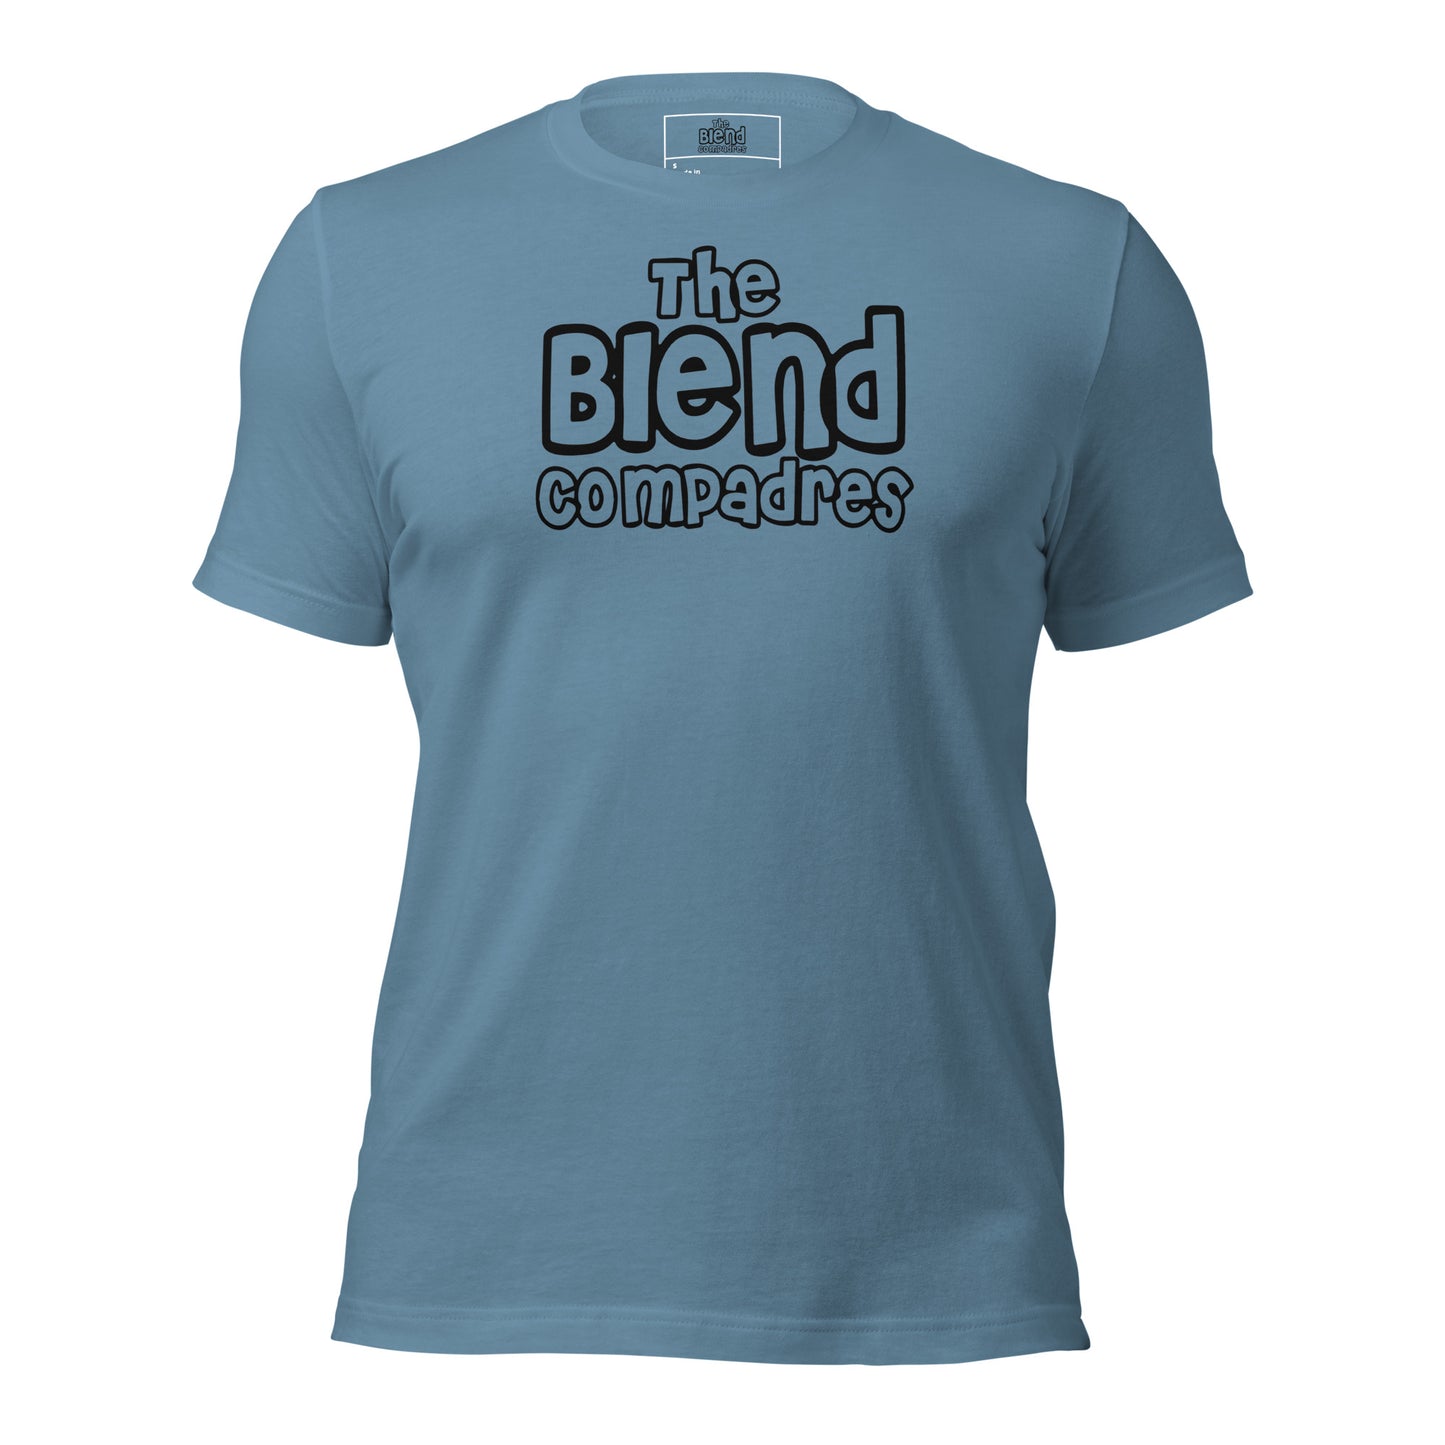 The Blend Compadres Unisex t-shirt - Another Bodega